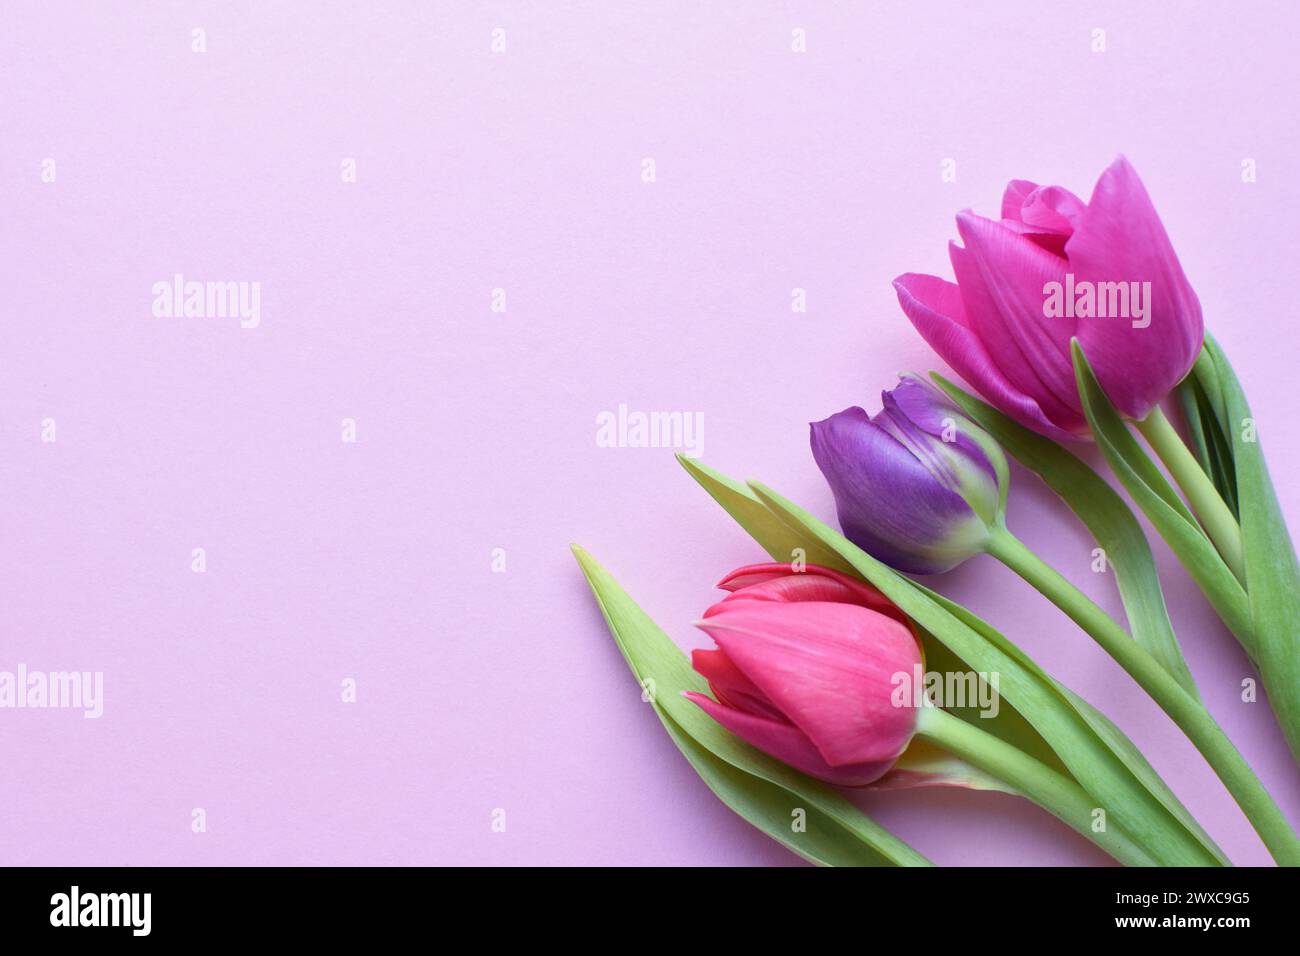 Bouquet of colorful spring tulips for Mother's Day or Women's Day on a  pink background.  Copy space Stock Photo